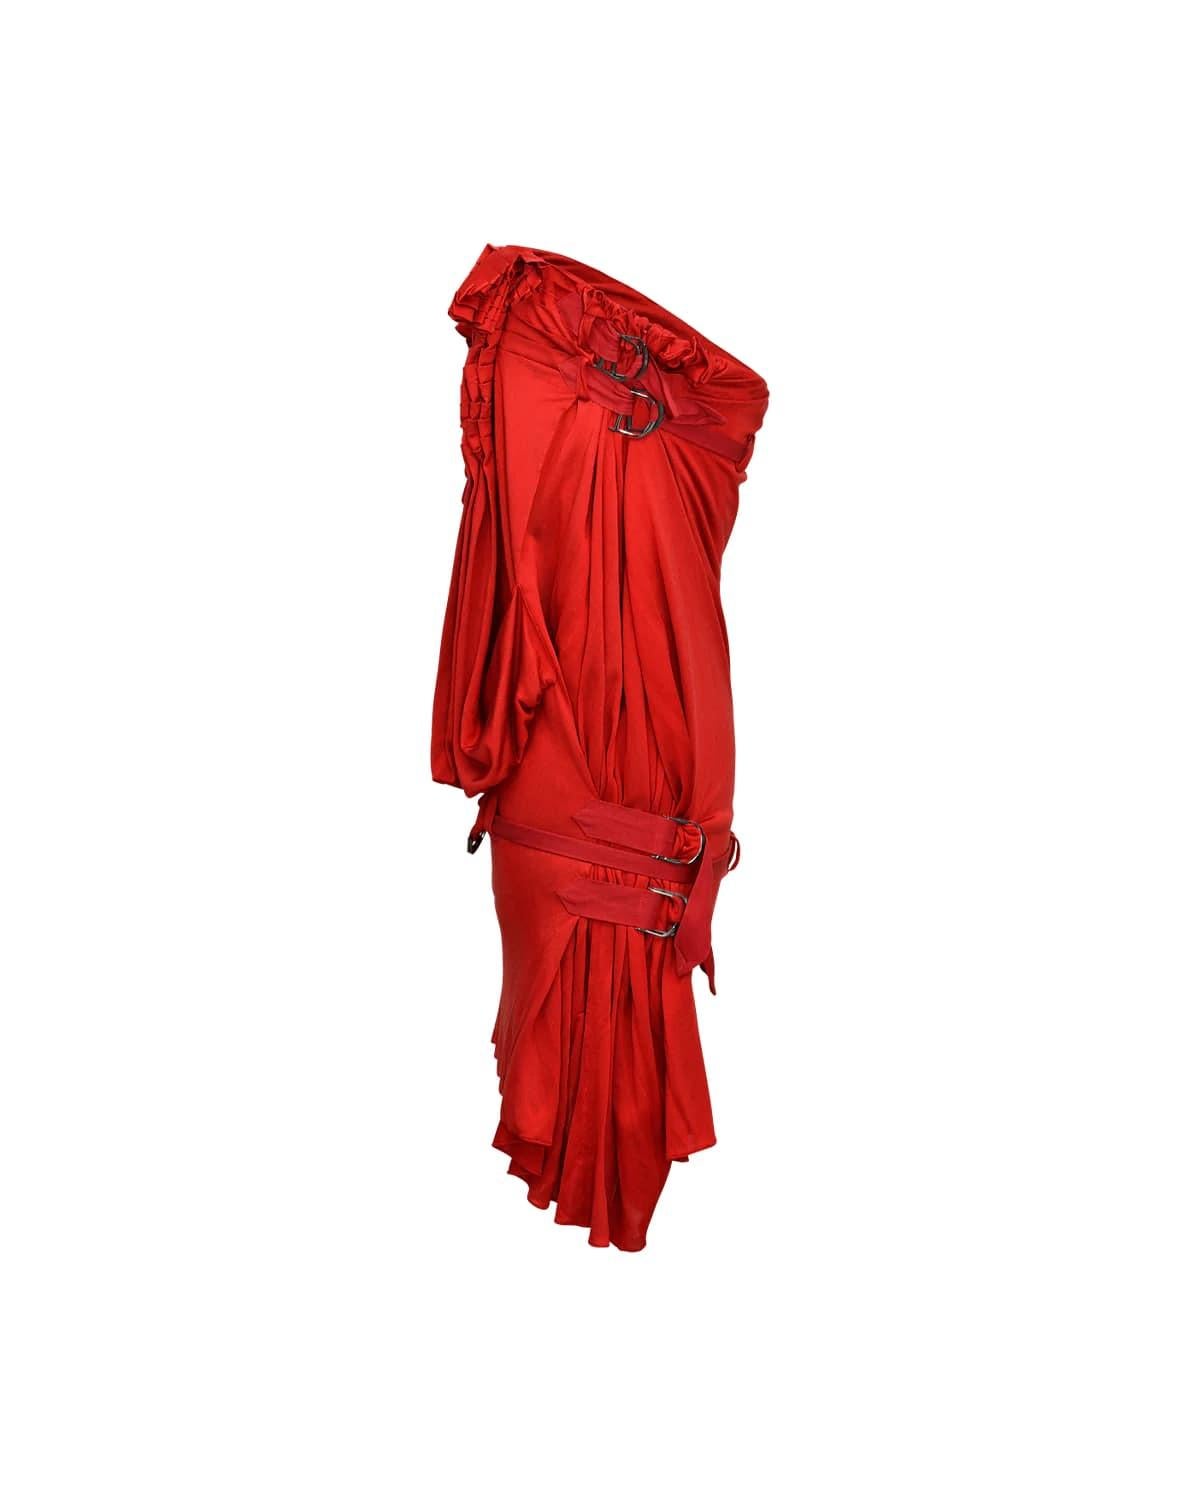 Christian Dior by Galliano strapless red dress with draped front paneling, ruched side and bottom panels and strappy, hanging “D” for Dior details that wrap around the back of the dress. Dress is a mini length. Look 43 on the runway worn by